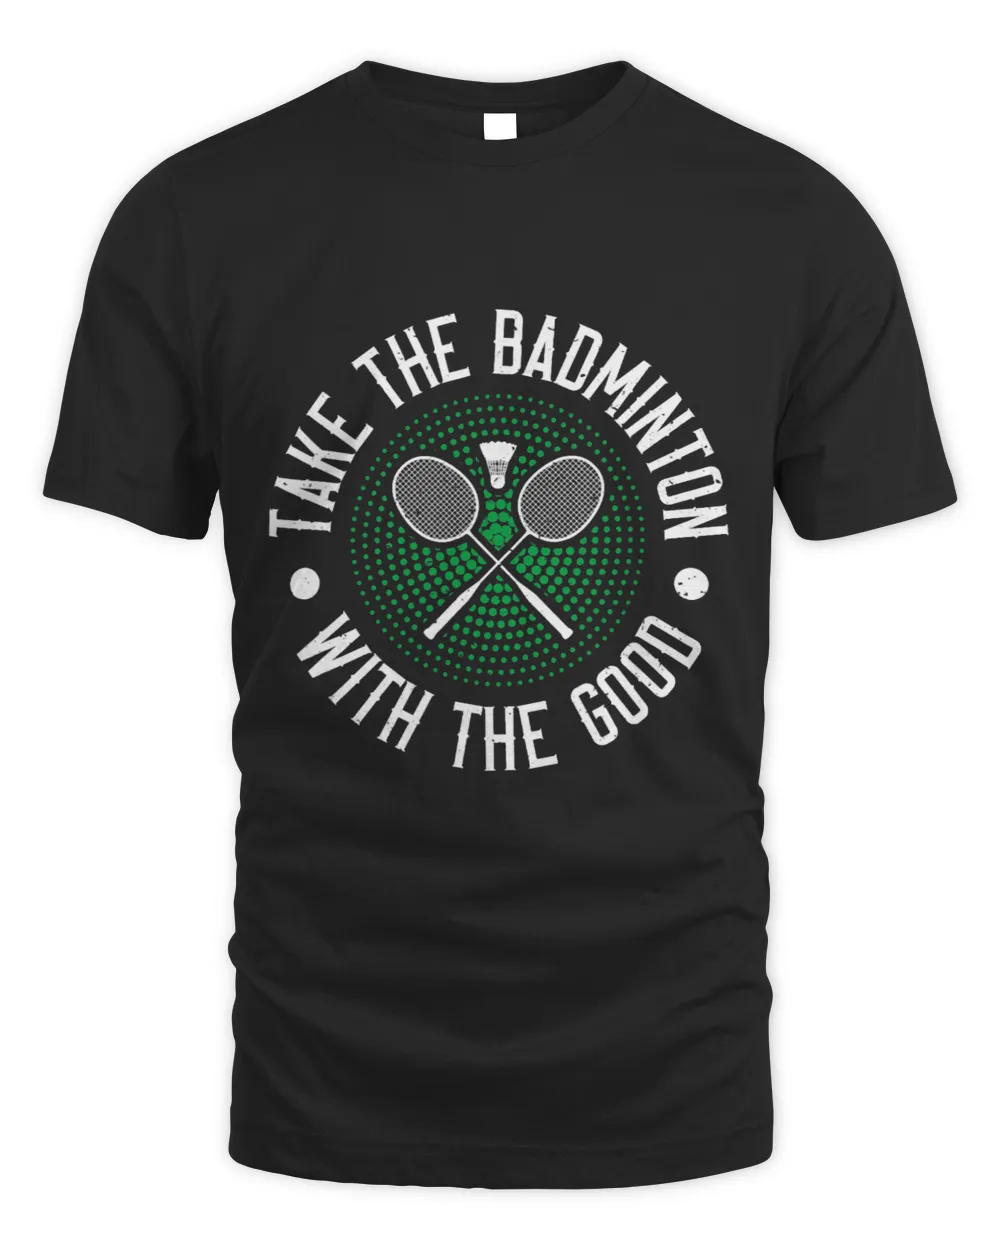 Take The Badminton With The Good Funny Badminton Player